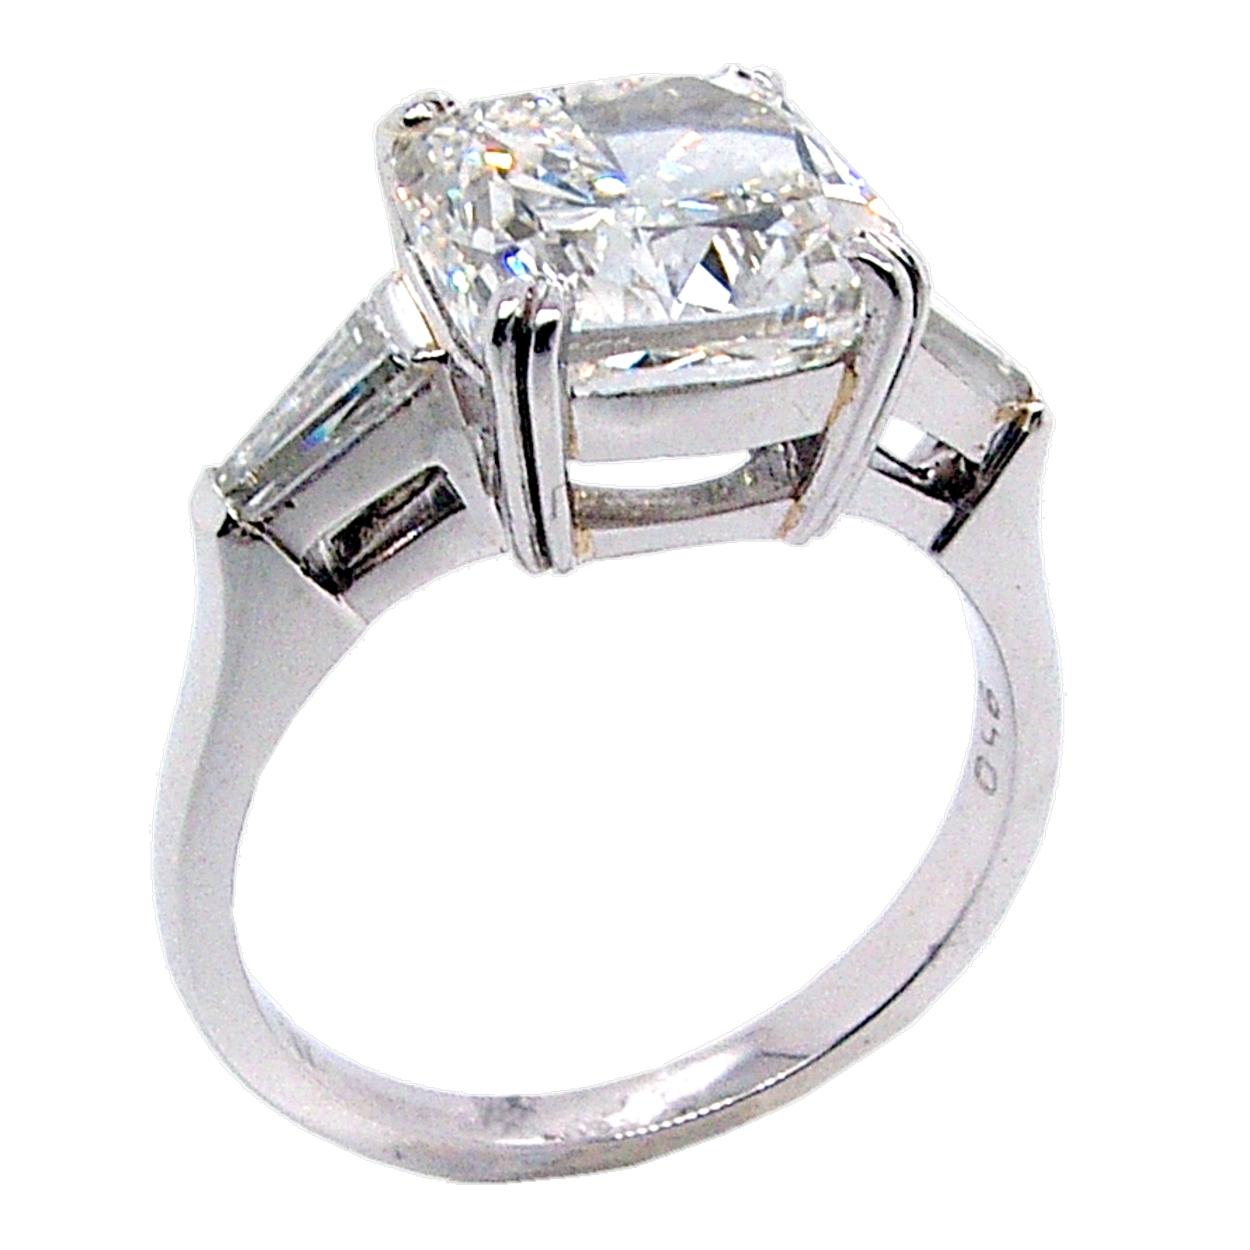 A beautiful square Cushion Cut H/VS2 GIA certified center Diamond set in a fine Platinum 3 stone Engagement Ring with 2 Baguette diamonds the side. Total diamond weight of 0.37 Ct. on the side. 

Diamond specs:
Center stone: 4.01 Ct GIA Certified